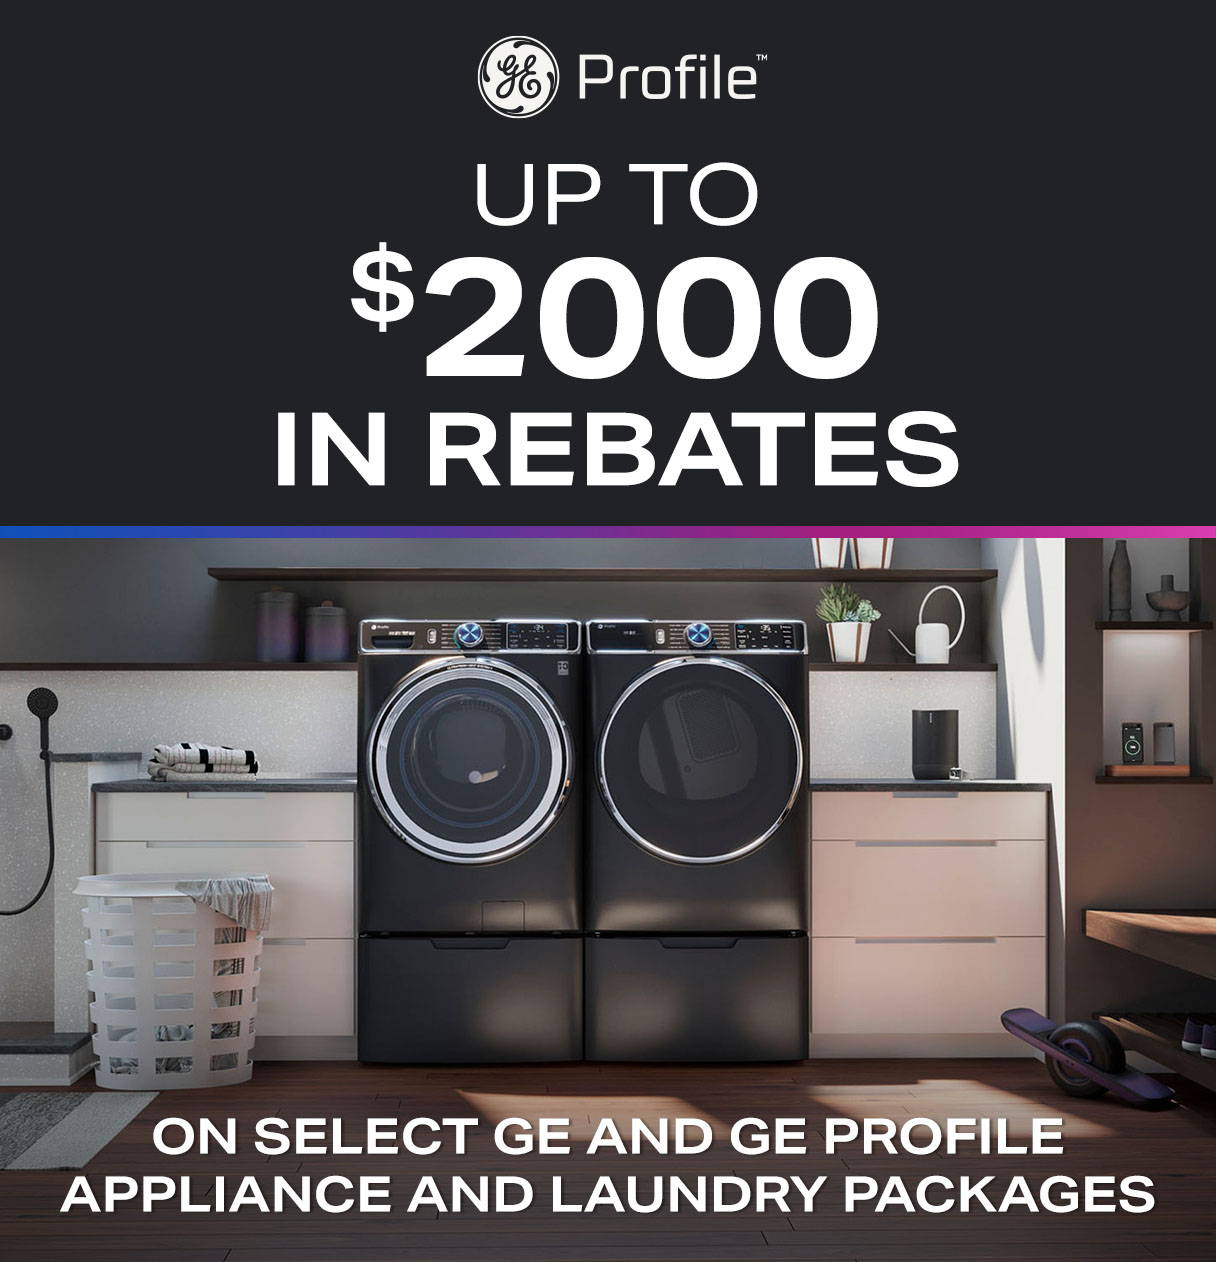 Gateway to Profile rebates - up to $2000 on select GE and GE Profile  Appliance and Laundry packages.